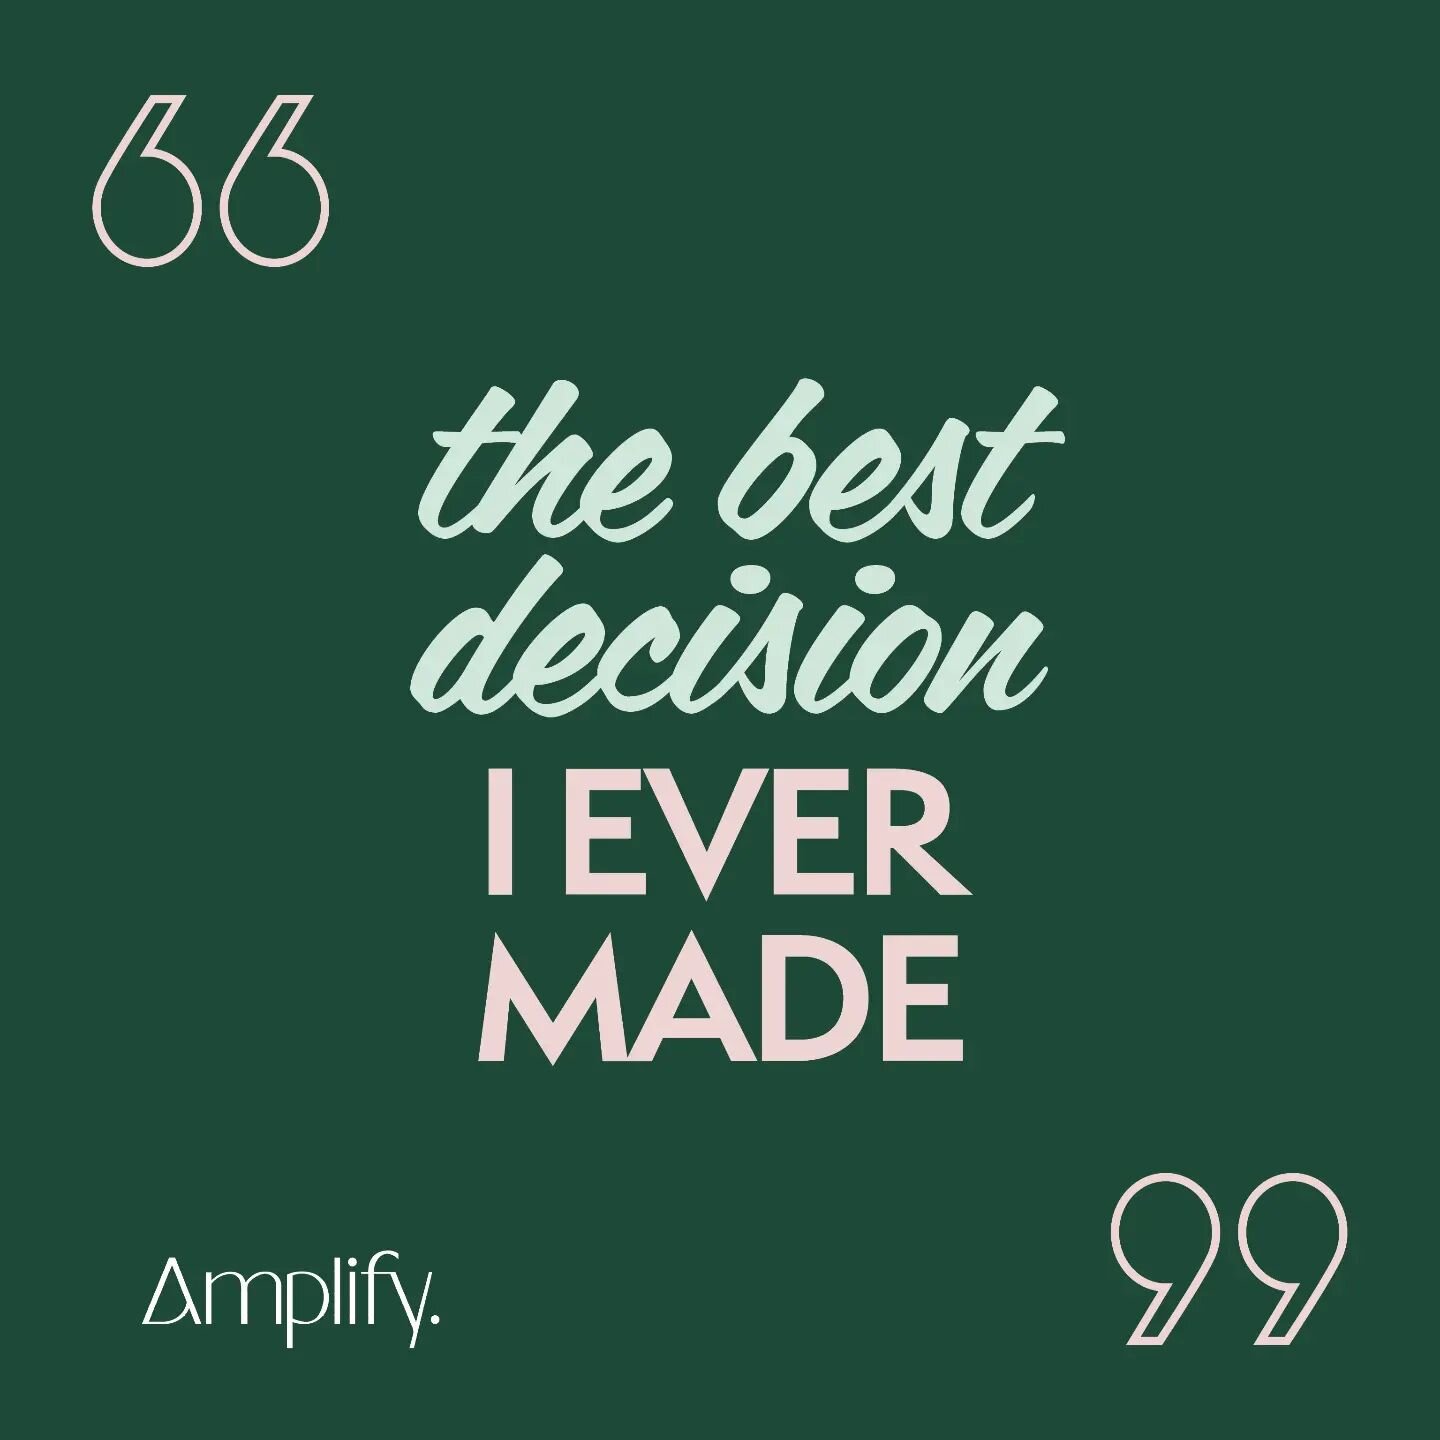 &ldquo;The best decision I ever made&rdquo;. Words directly from our client when discussing the decision to appoint Amplify. We are buzzing with joy!!! 😜

👉 Delivering positive change
👉 Enhancing experiences
👉 Innovation and improvement